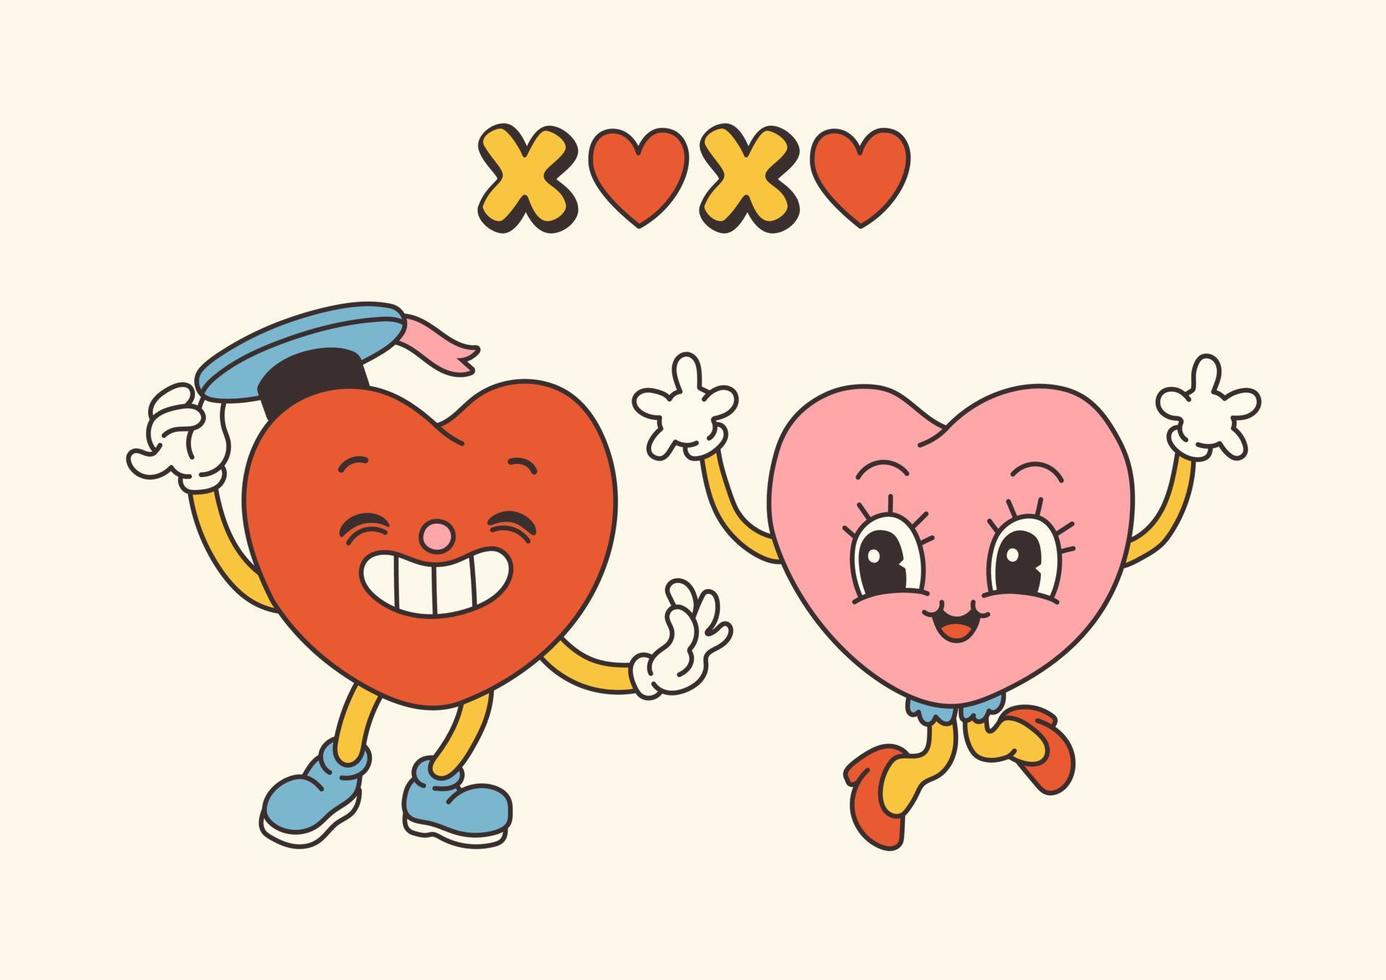 Retro Groovy Valentine's day characters with slogans about love. Trendy 70s cartoon style. Card, postcard, print vector